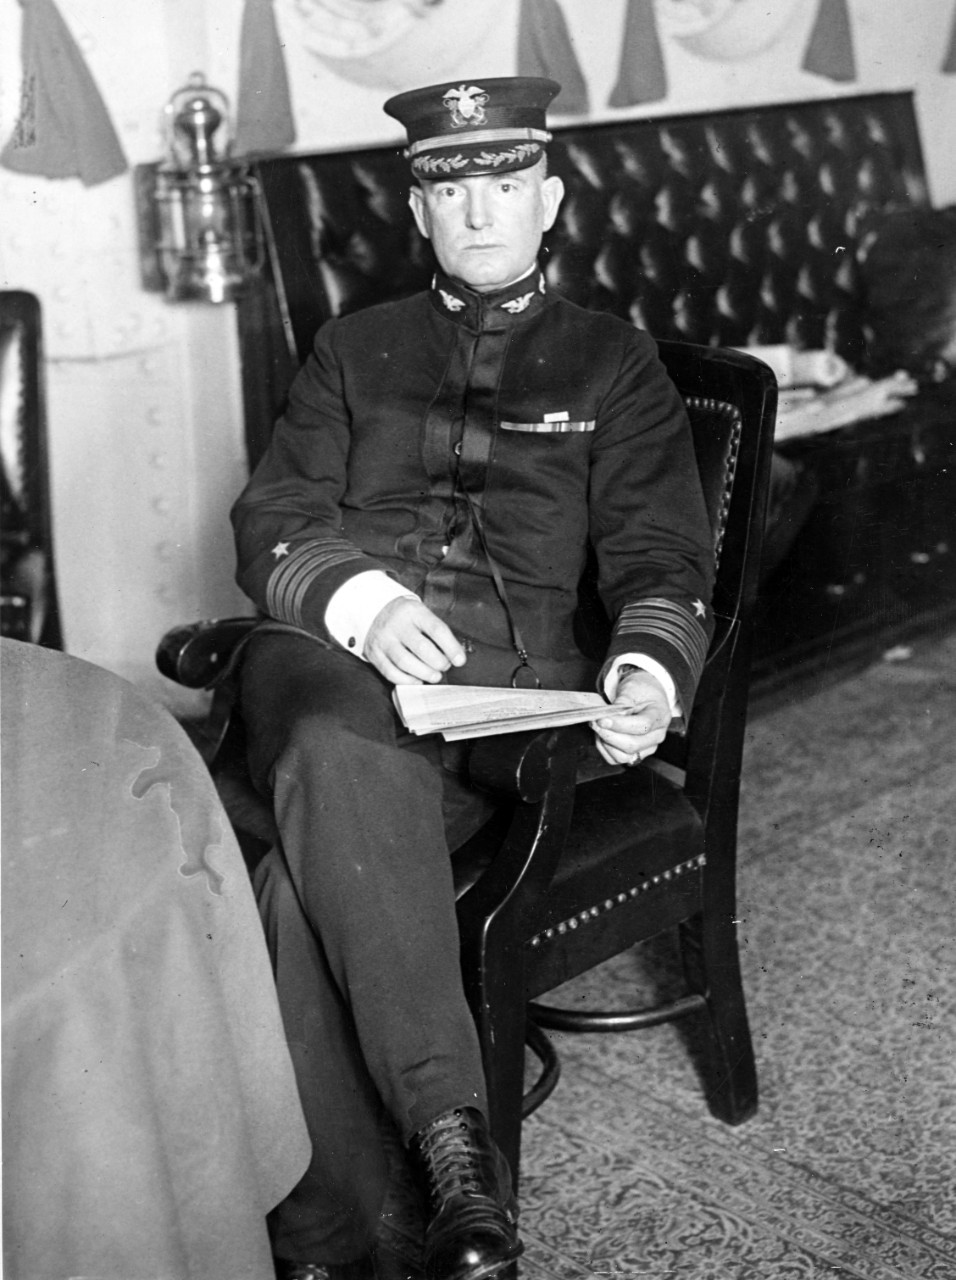 CAPT William A. Moffett, 25 December 1918, aboard USS Mississippi. Moffett served as commanding offier of the USS Mississippi, the newest battleship in commission at the time. 